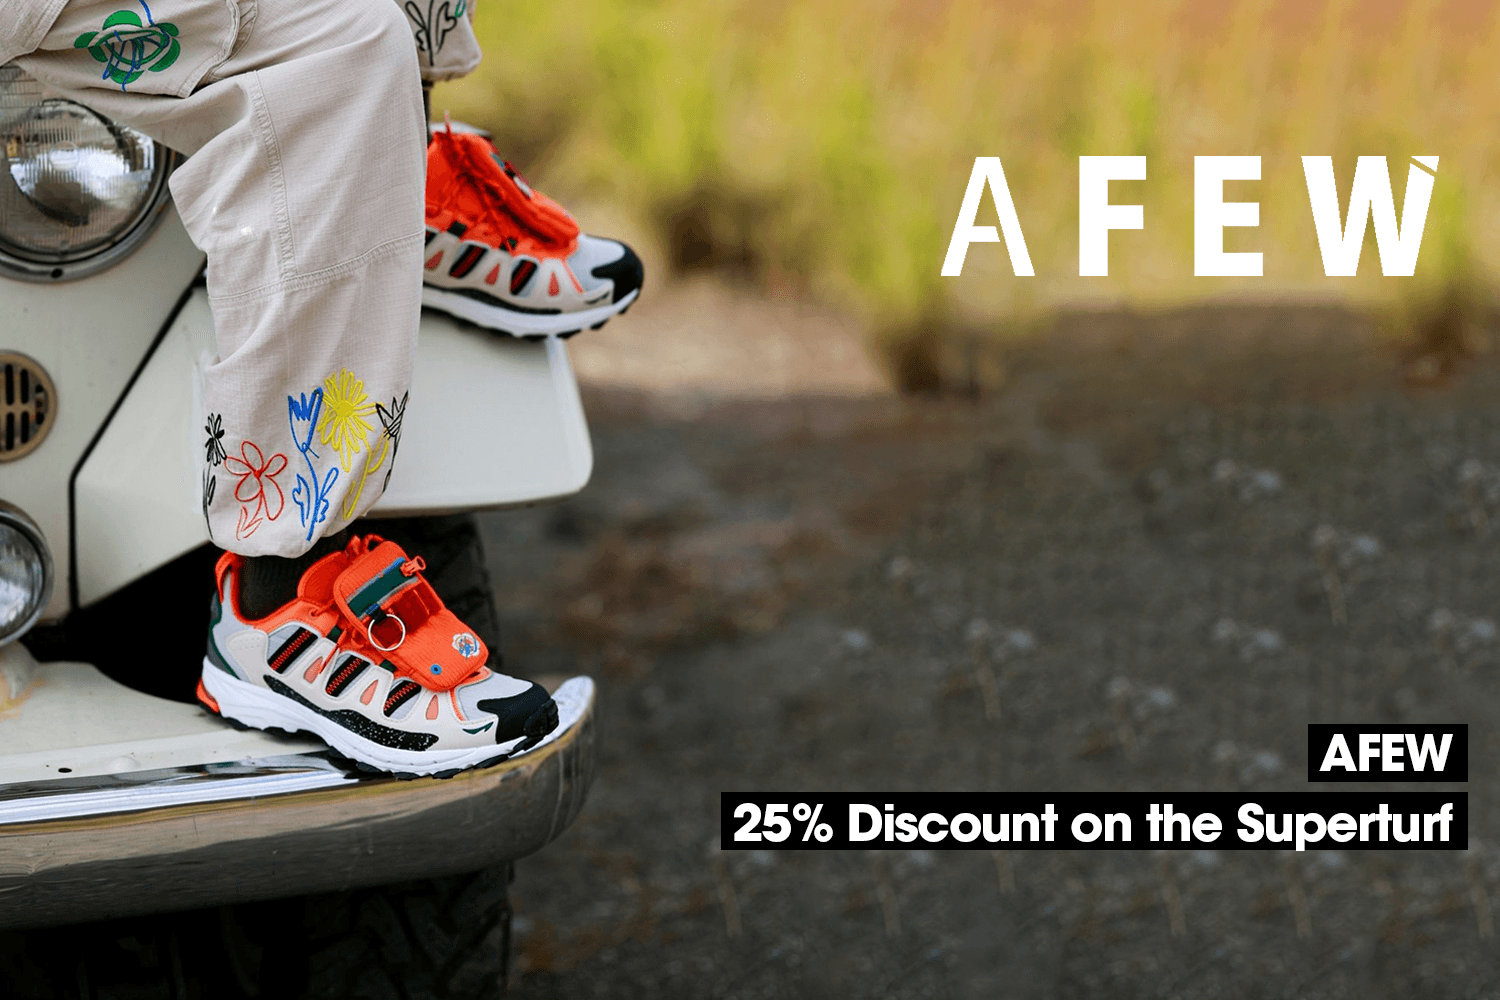 Get 25% discount on the adidas Superturf at AFEW